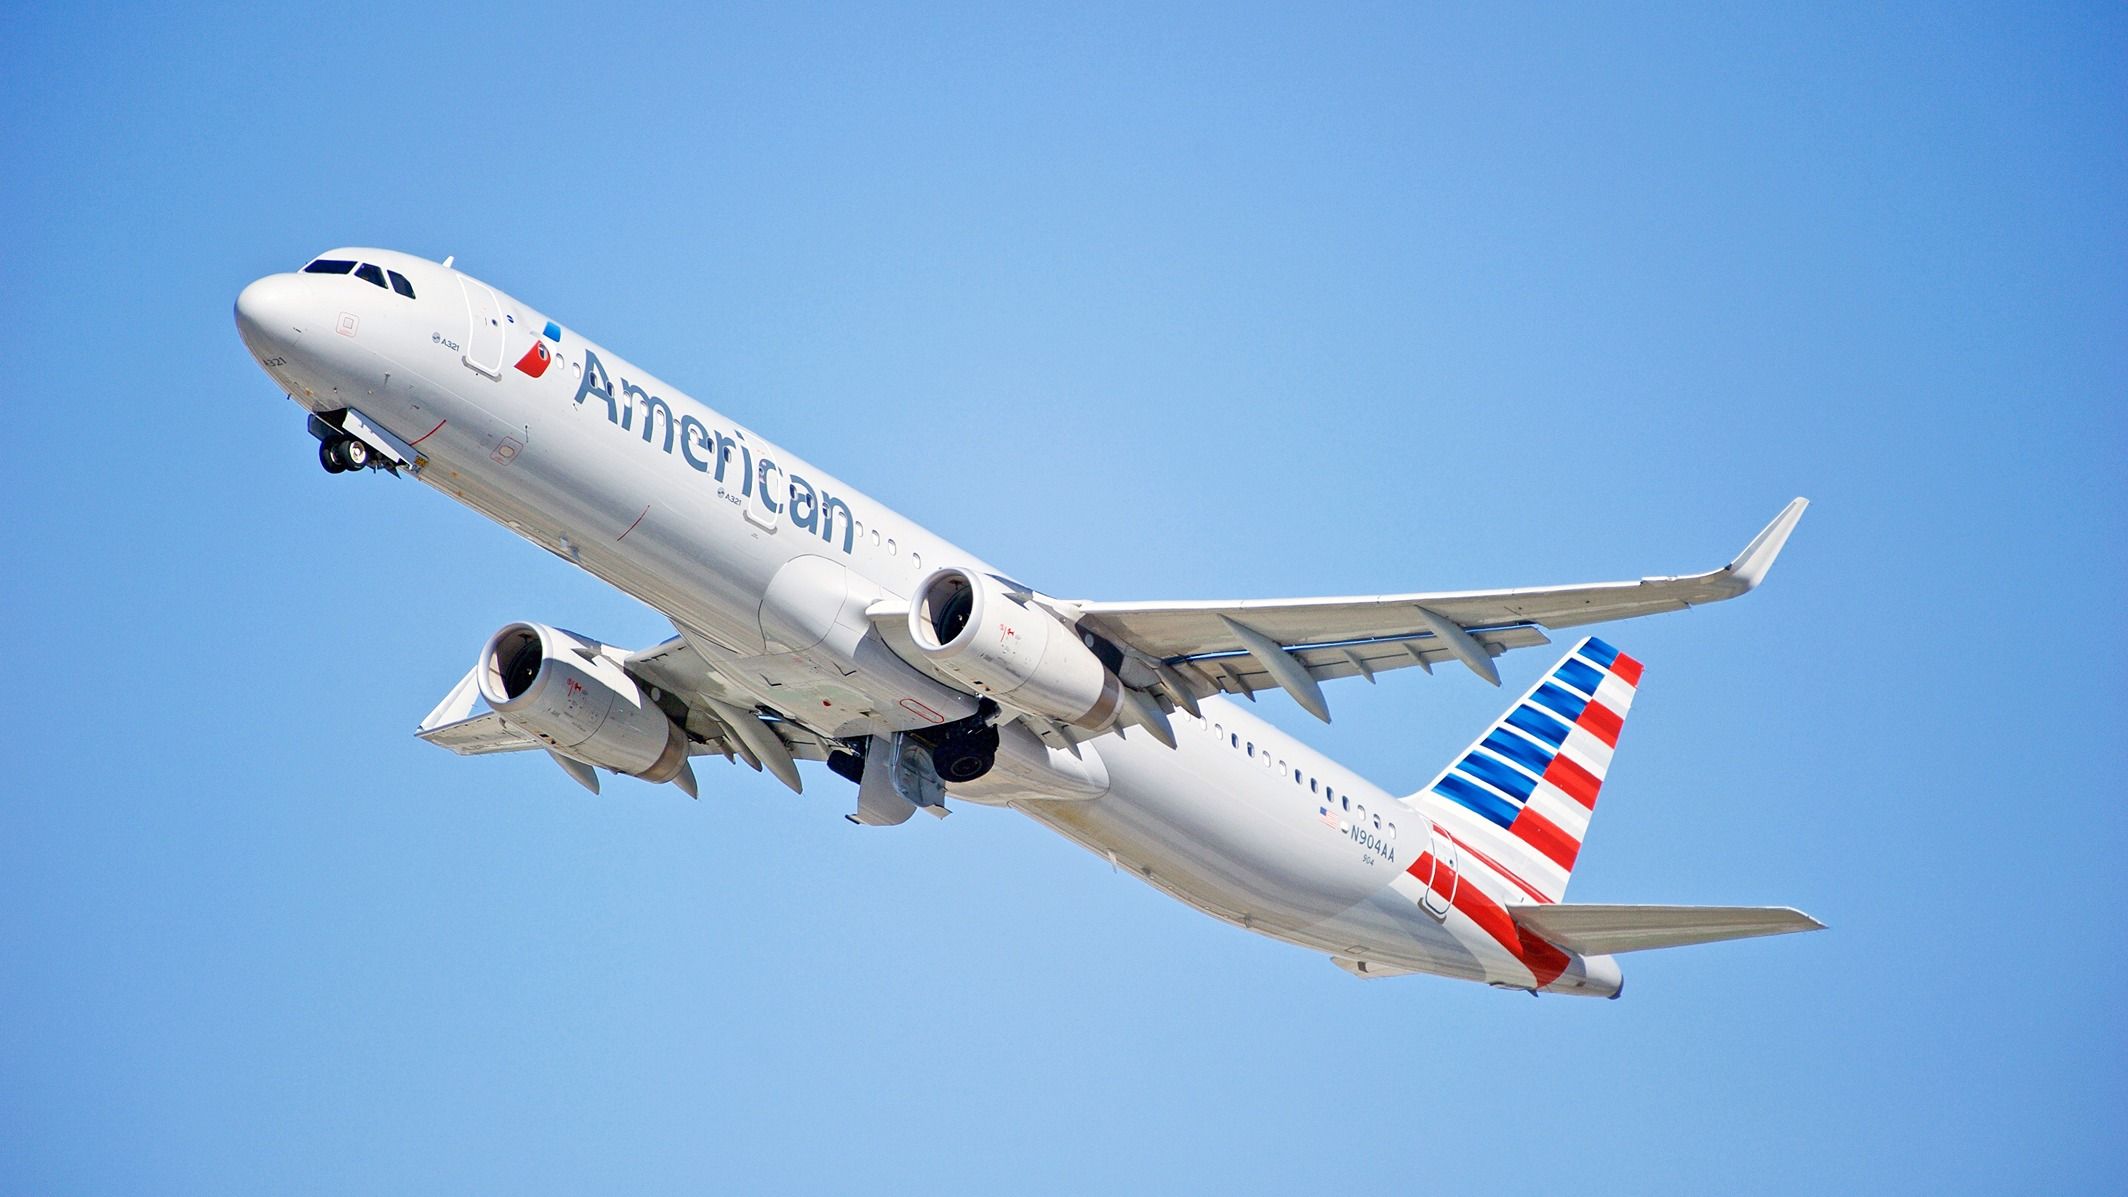 American Airlines Airbus A321ceo departing Los Angeles International Airport LAX shutterstock_1237941793